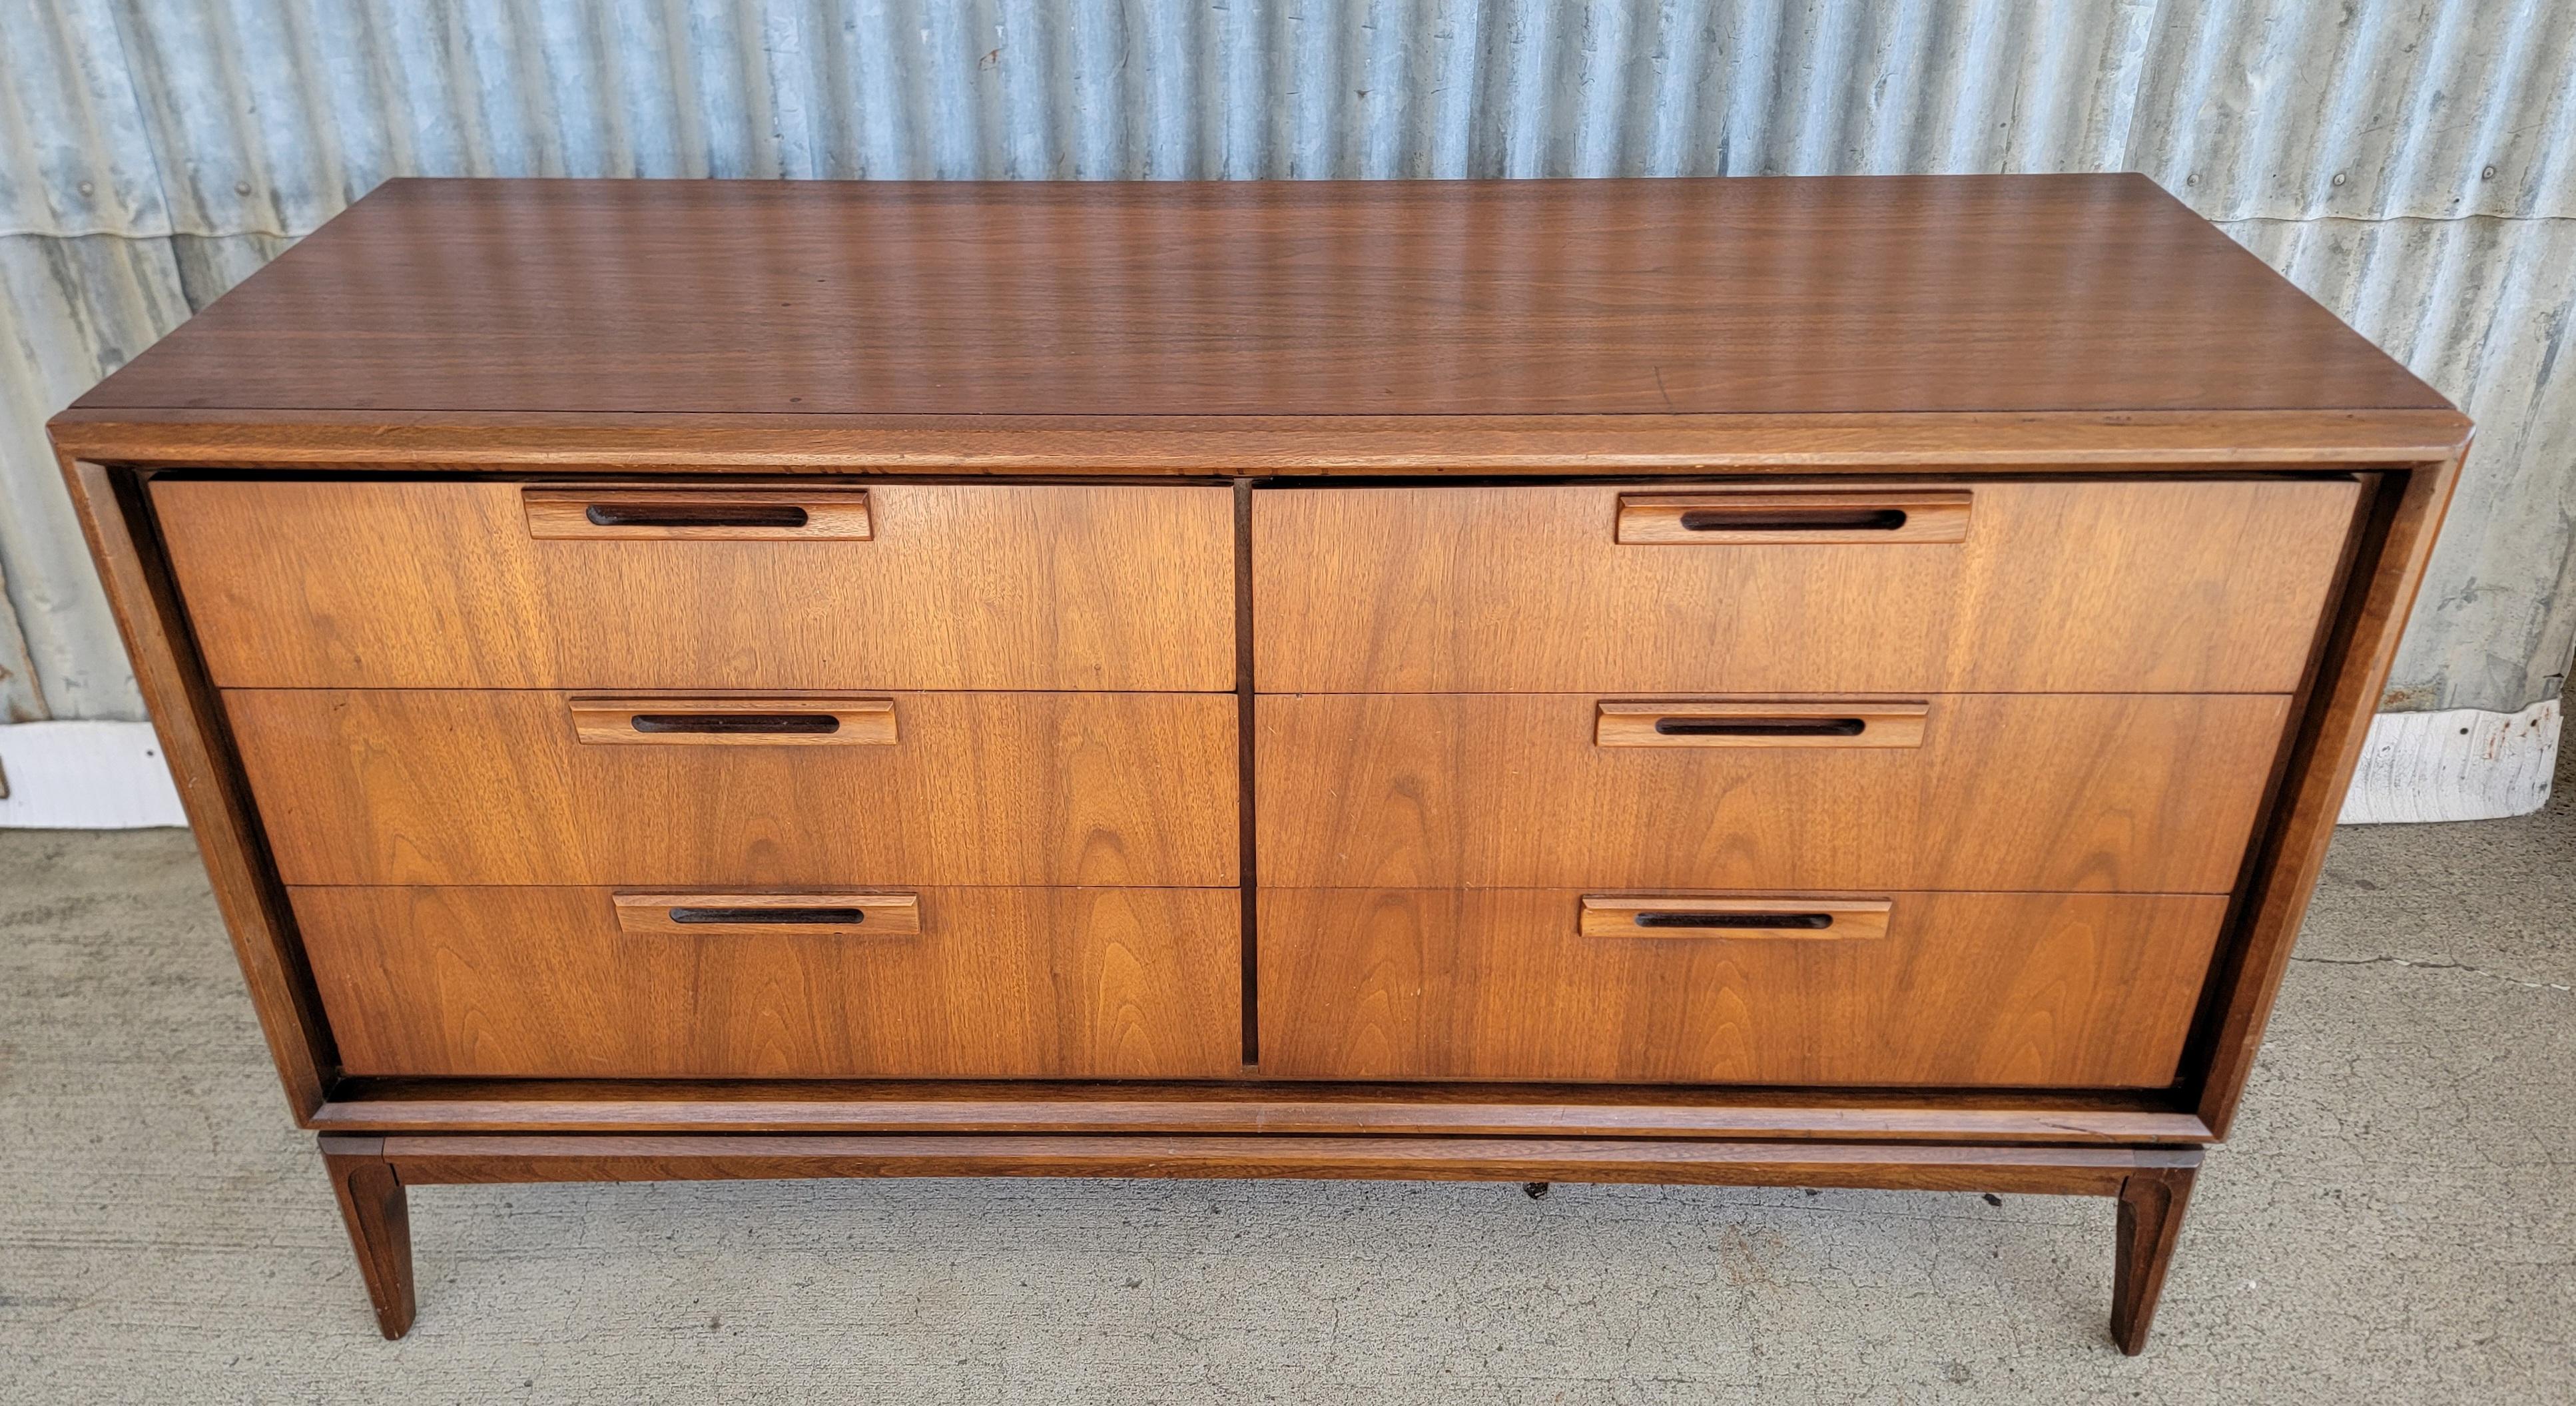 A walnut six drawer low dresser by United Furniture Company, circa. 1950. Fine craftsmanship with solid oak interior woods and dovetail construction. Dust panels between drawers and center drawer glide tracks. Very good original condition retaining